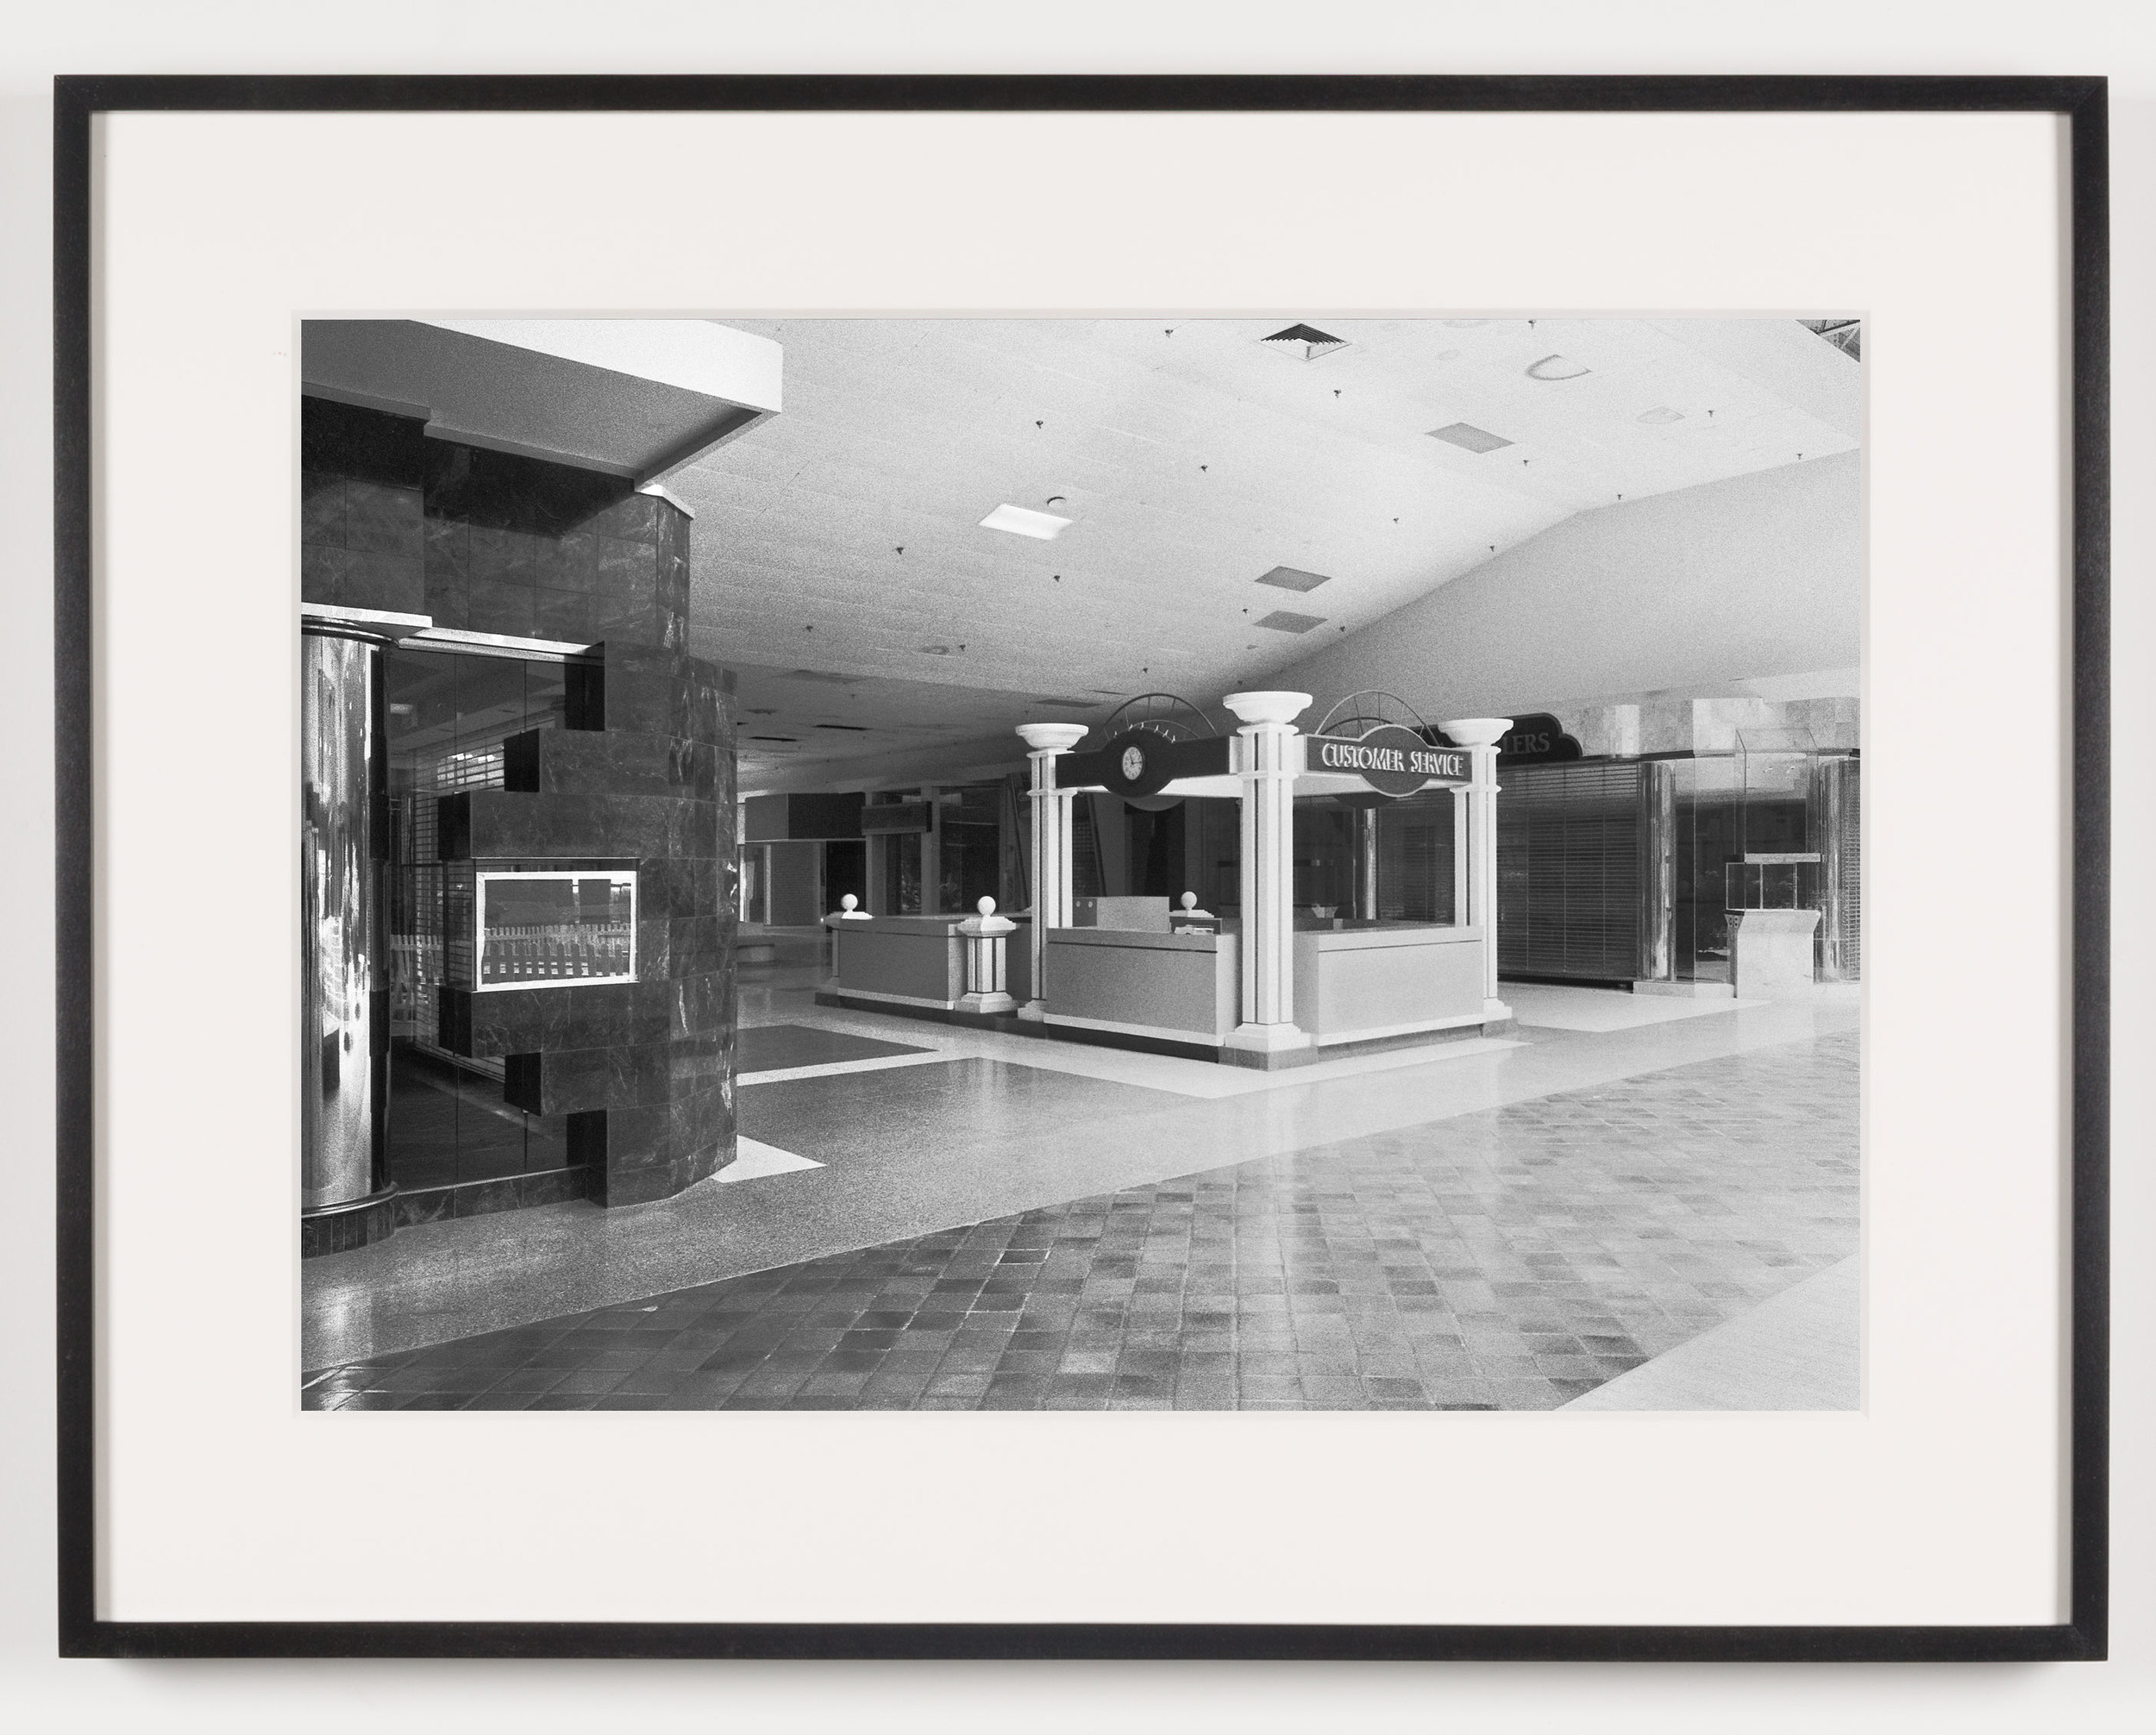   Rolling Acres Mall (View of Customer Service Kiosk), Akron, OH, Est. 1975    2011   Epson Ultrachrome K3 archival ink jet print on Hahnemühle Photo Rag paper  21 5/8 x 28 1/8 inches  Exhibition:   A Diagram of Forces, 2011  